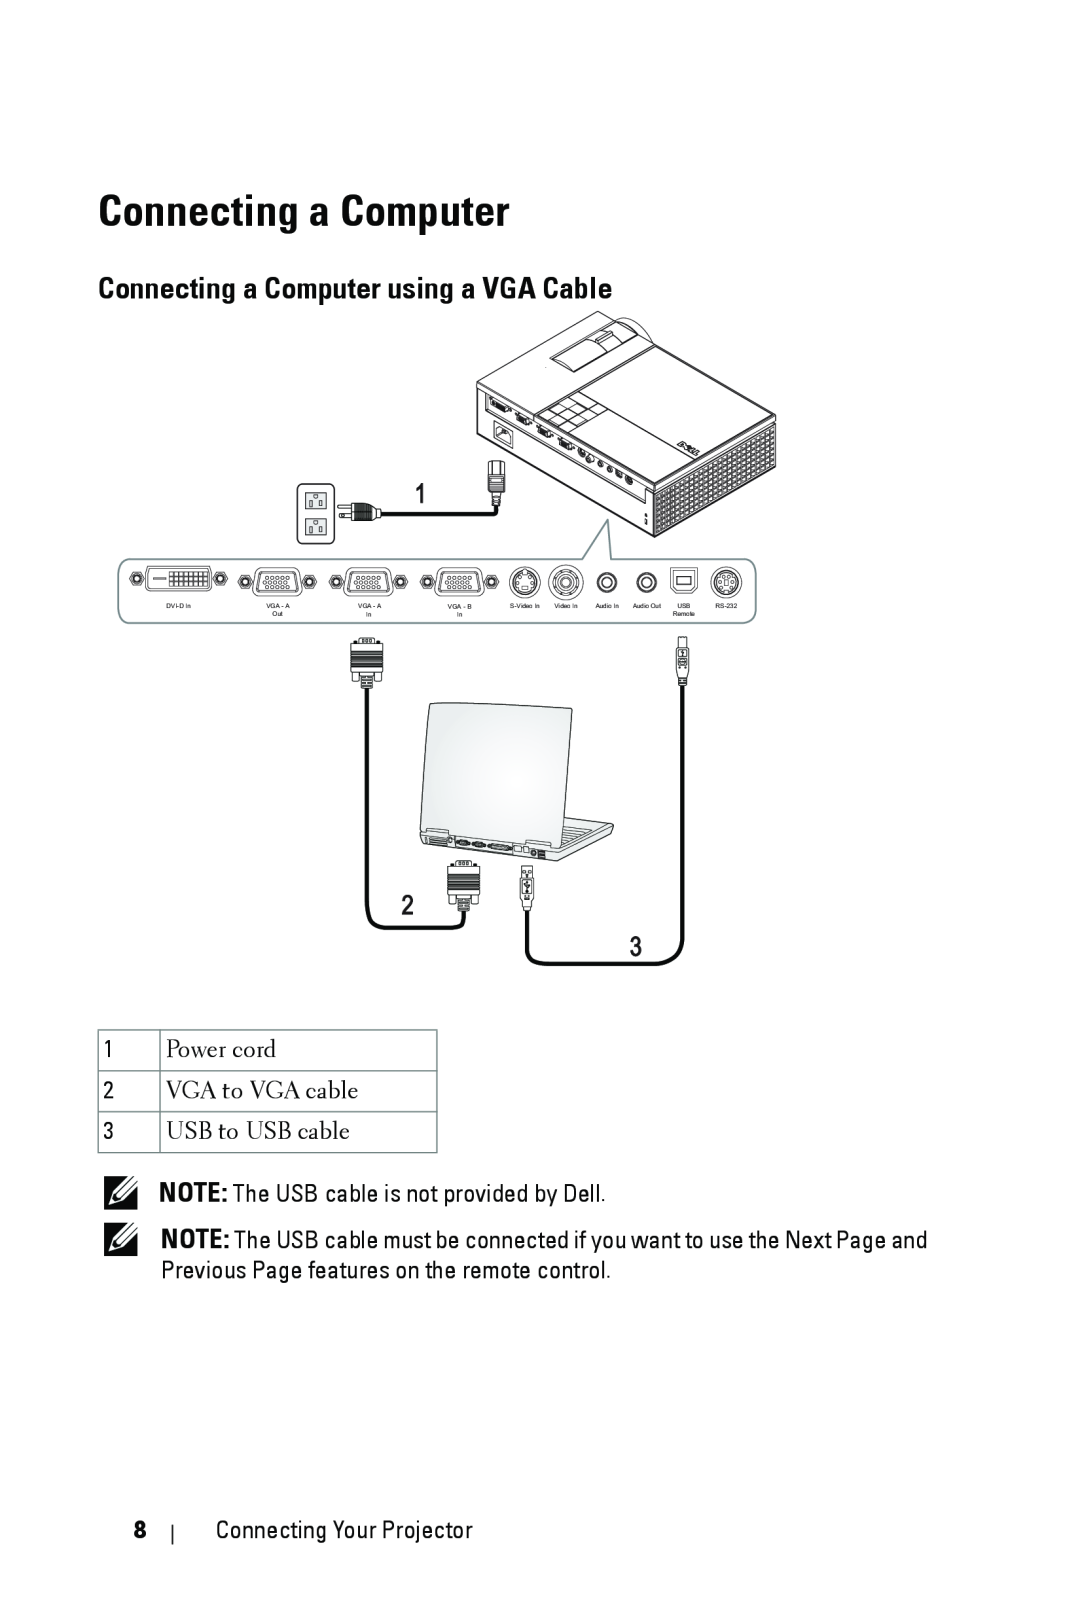 Dell 1209S manual Connecting a Computer using a VGA Cable, NOTE The USB cable is not provided by Dell 